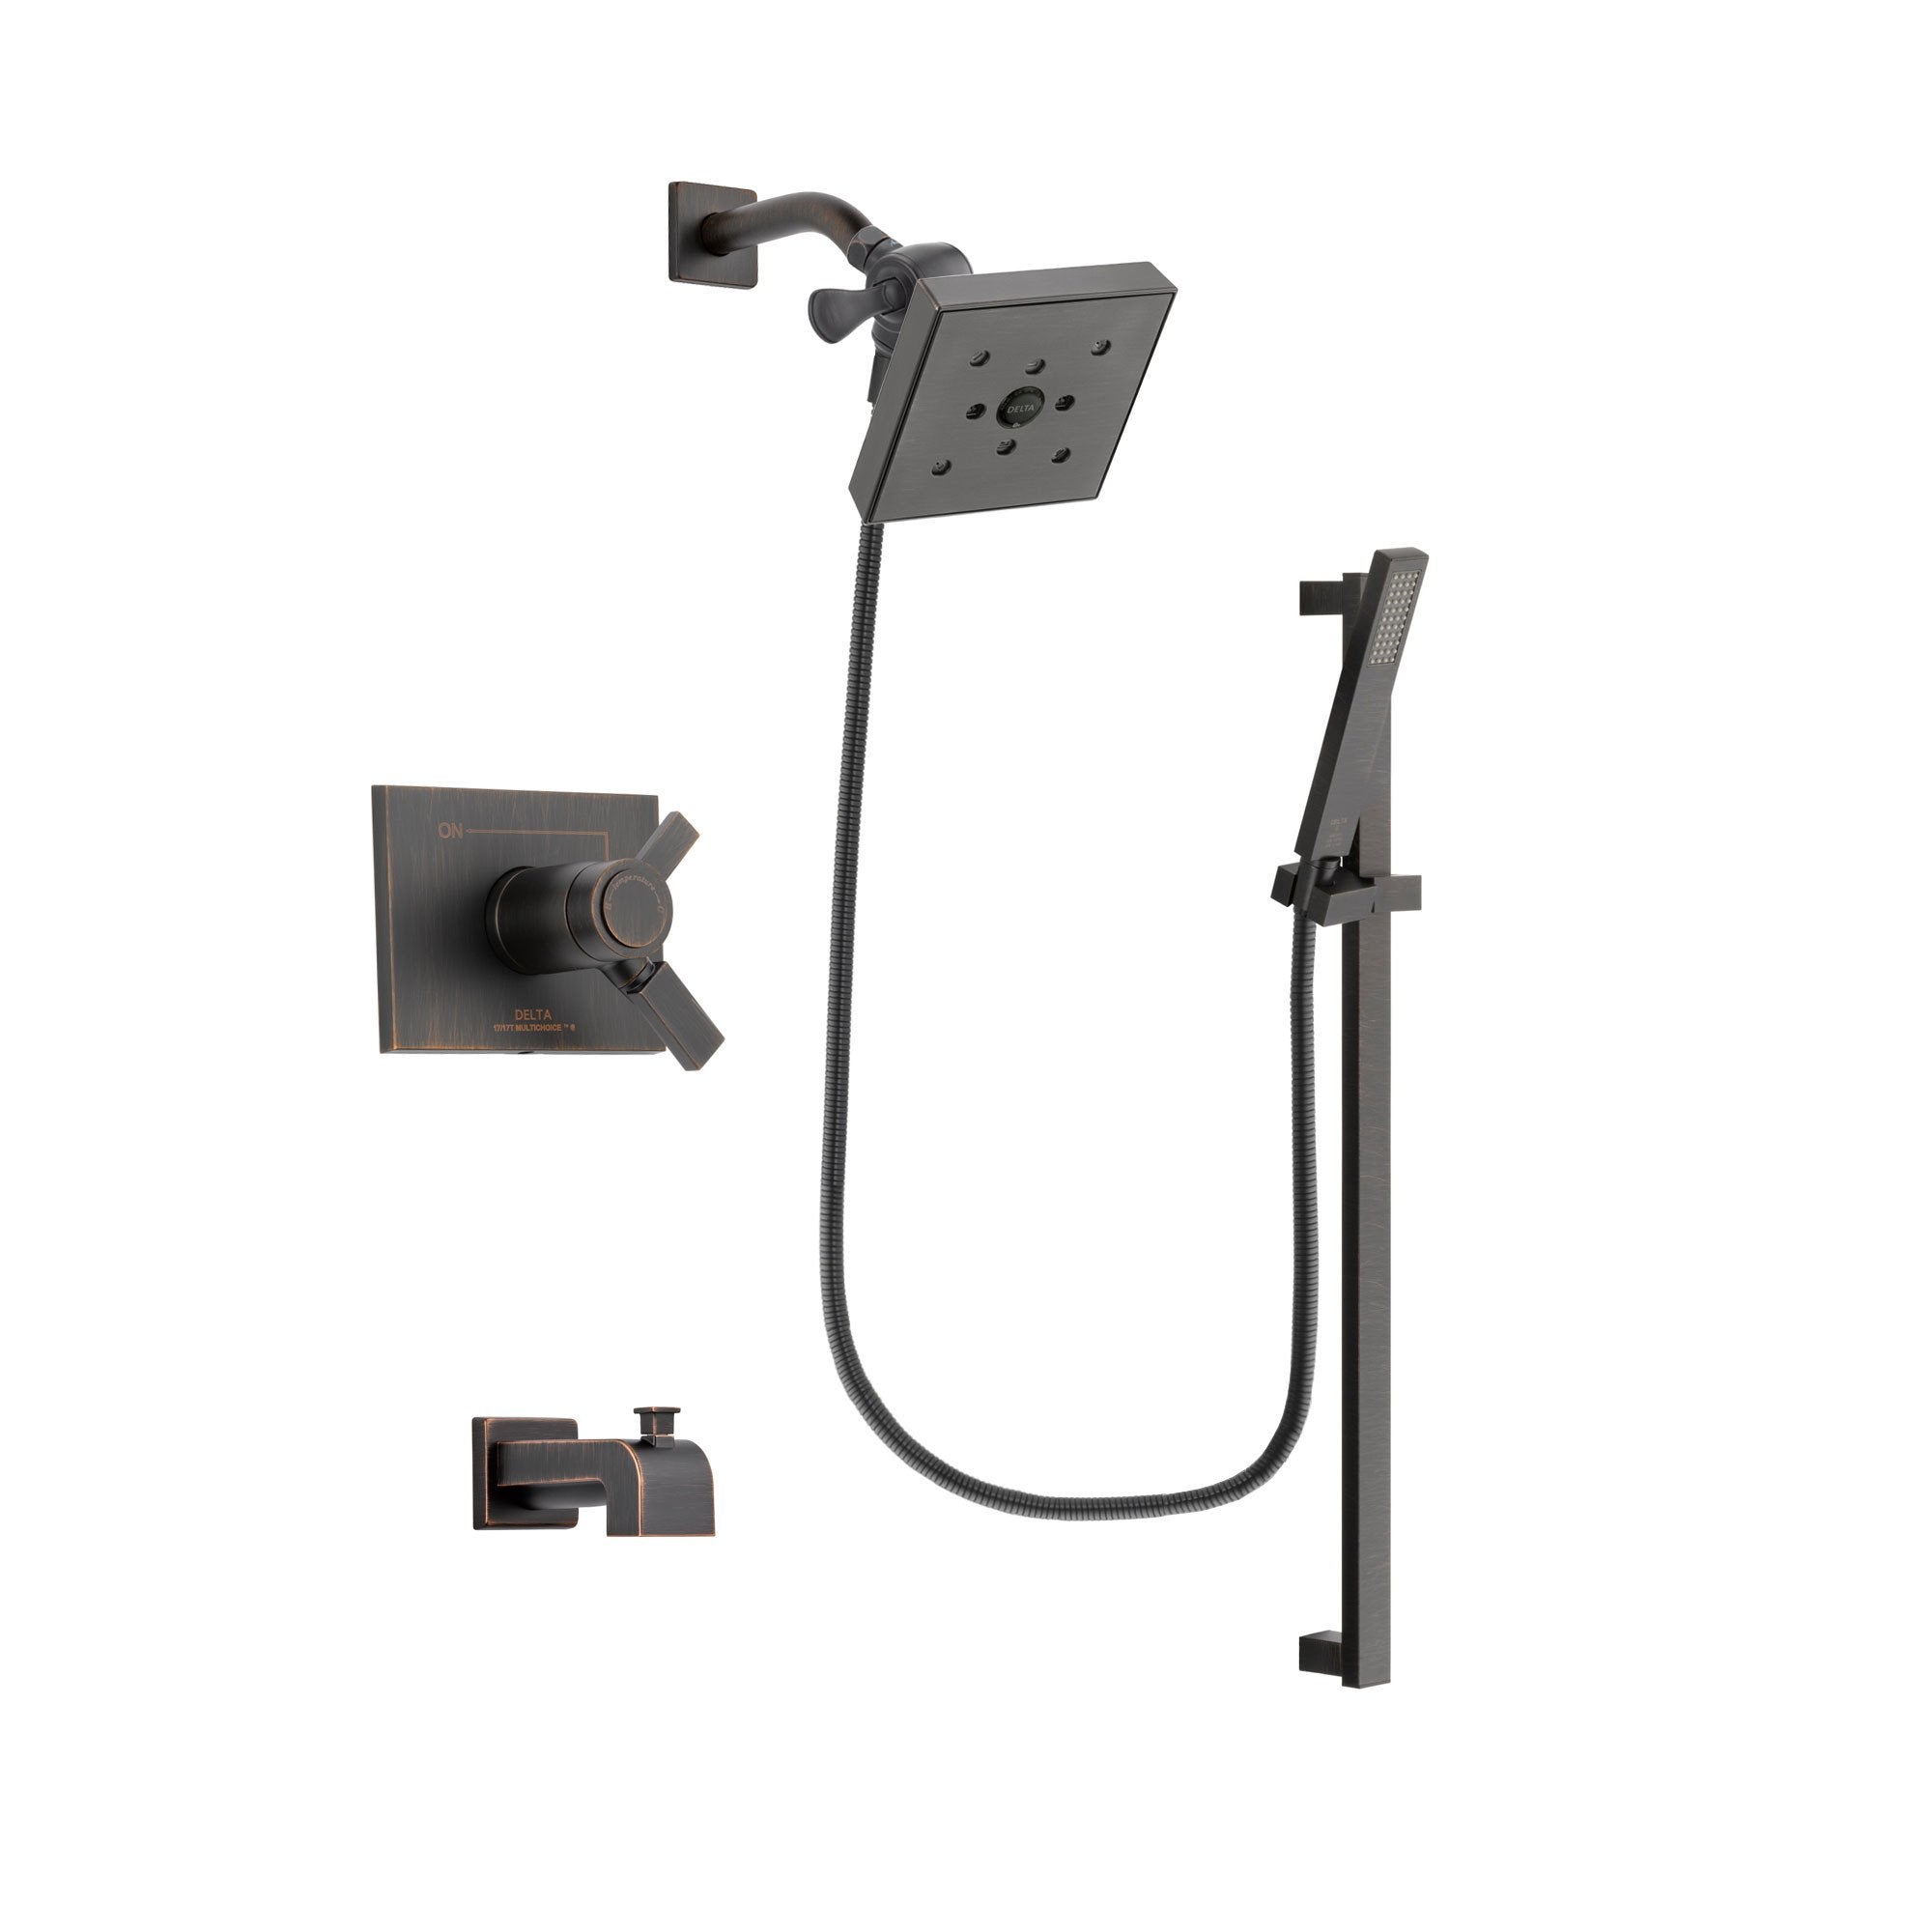 Delta Vero Venetian Bronze Finish Thermostatic Tub and Shower Faucet System Package with Square Shower Head and Modern Handheld Shower Spray with Square Slide Bar Includes Rough-in Valve and Tub Spout DSP3199V